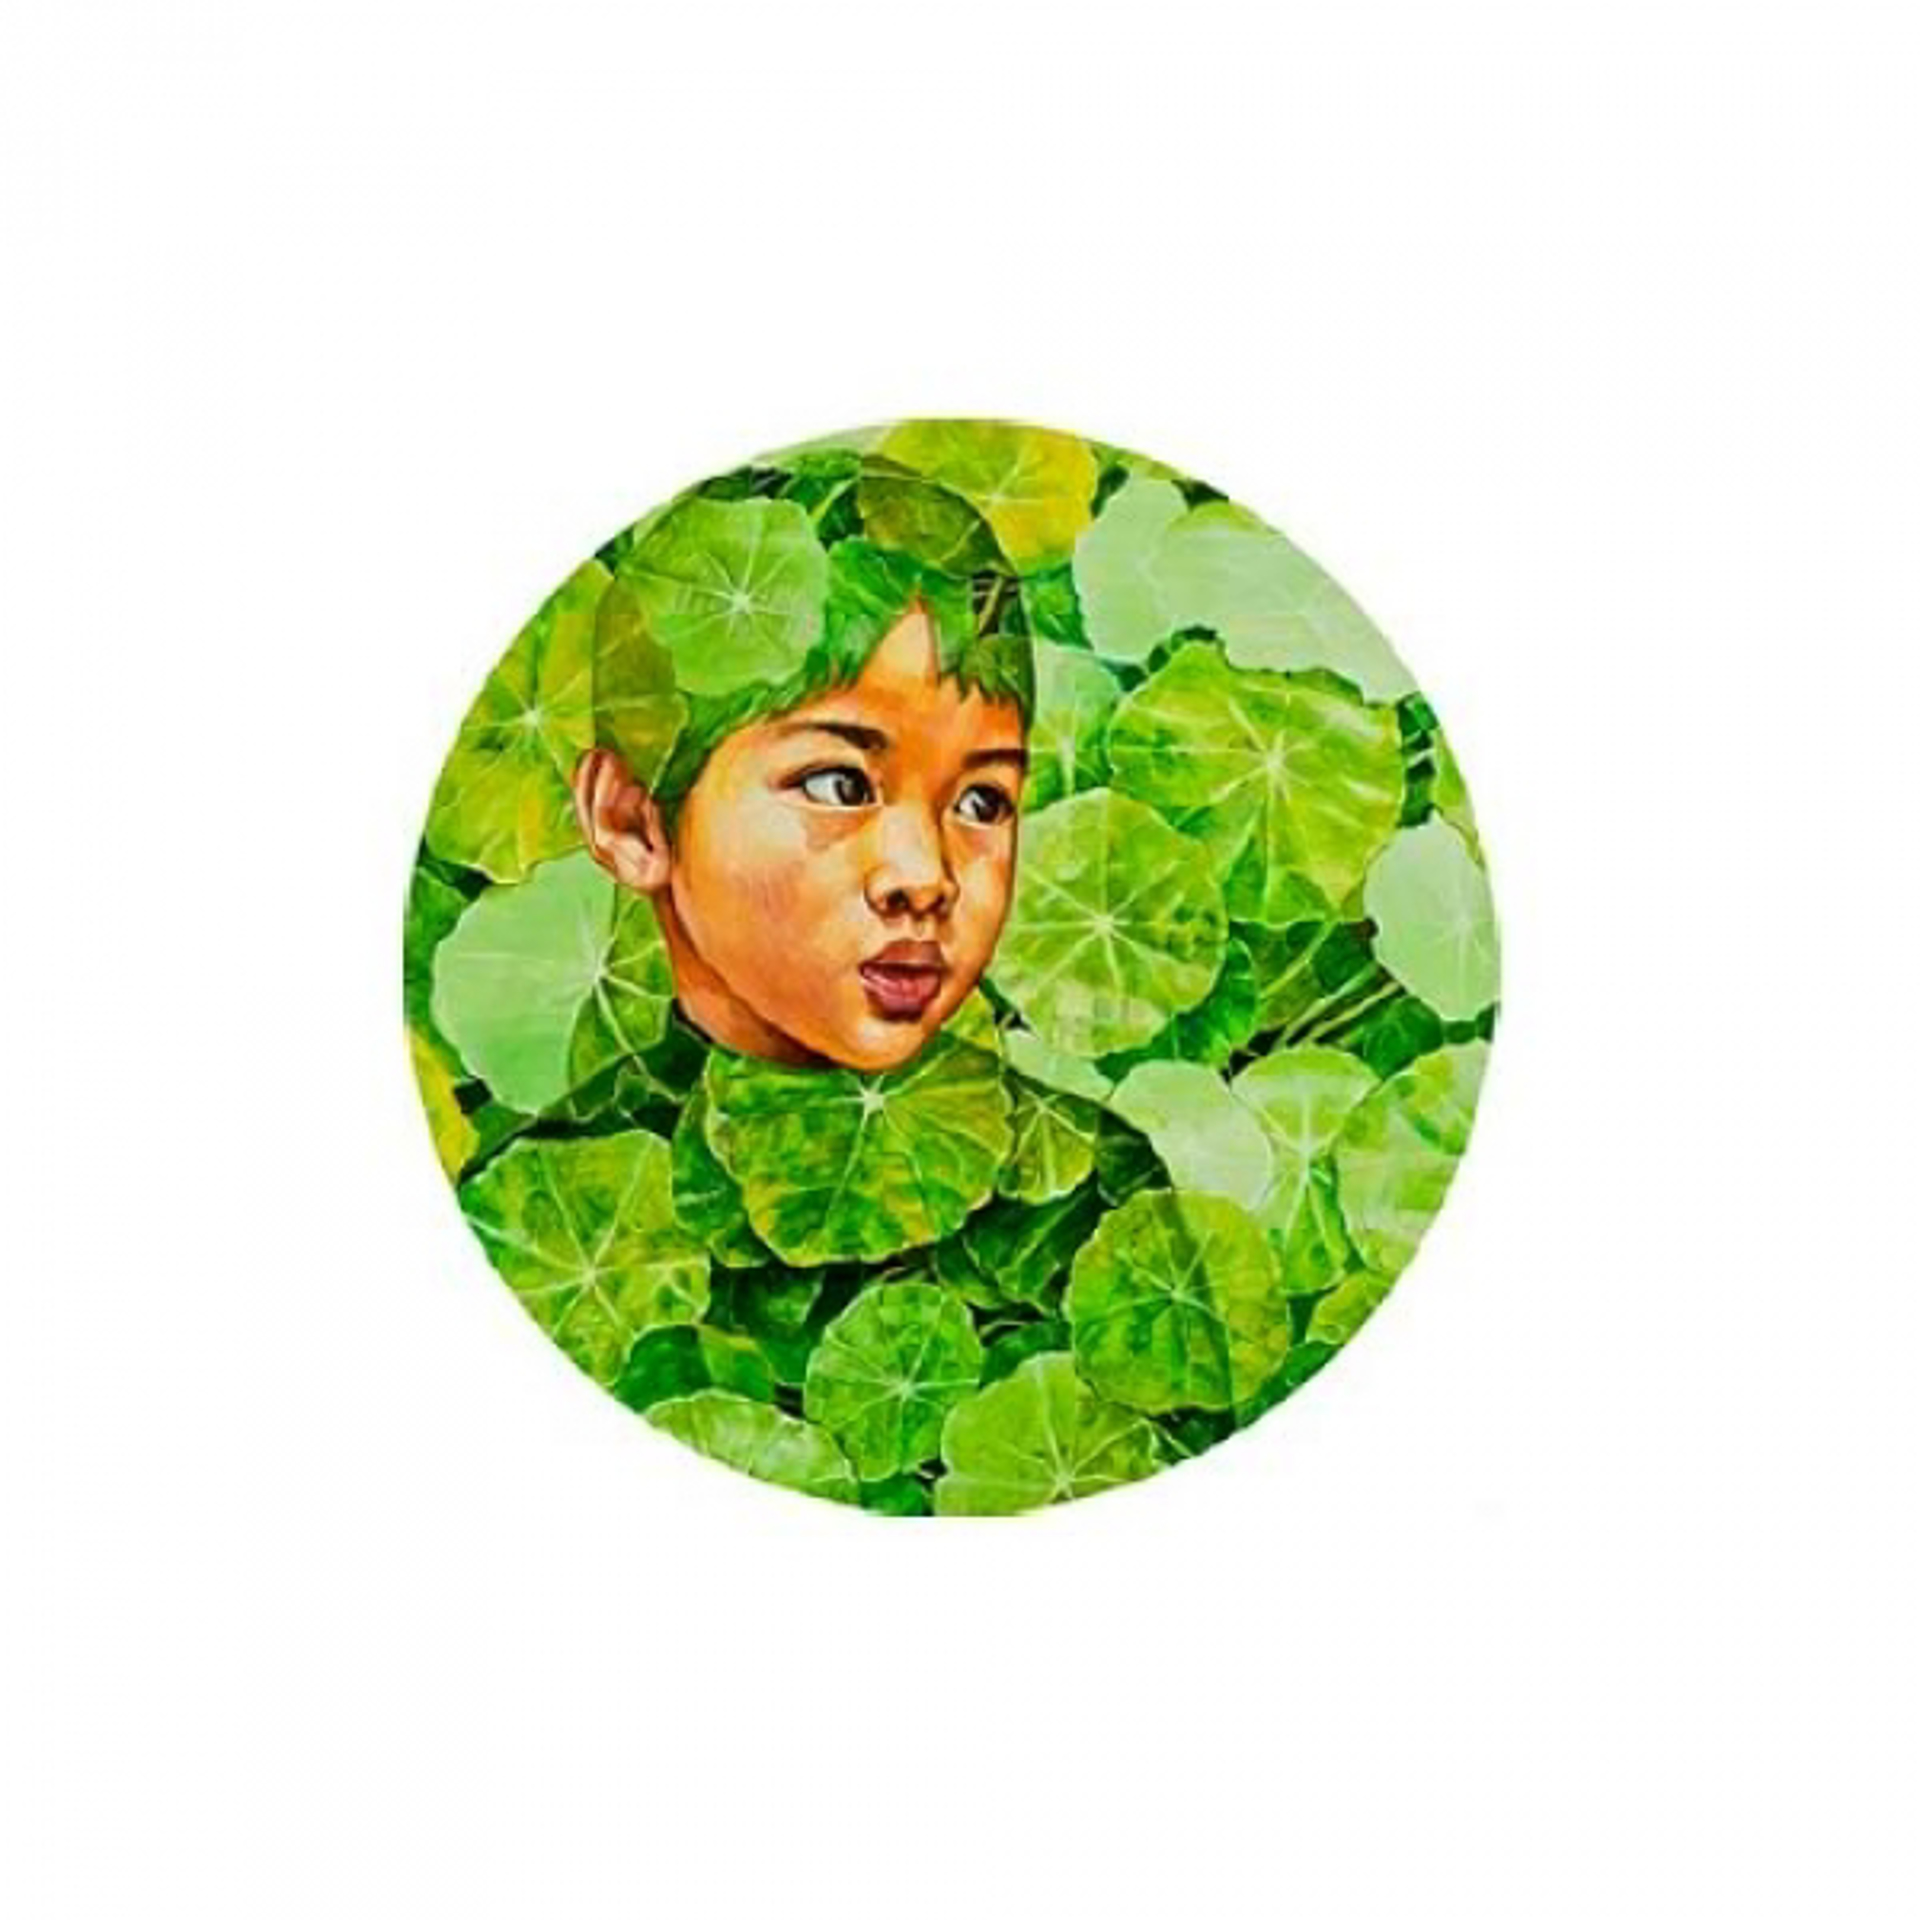 Lily Pad Child by Mee Shim